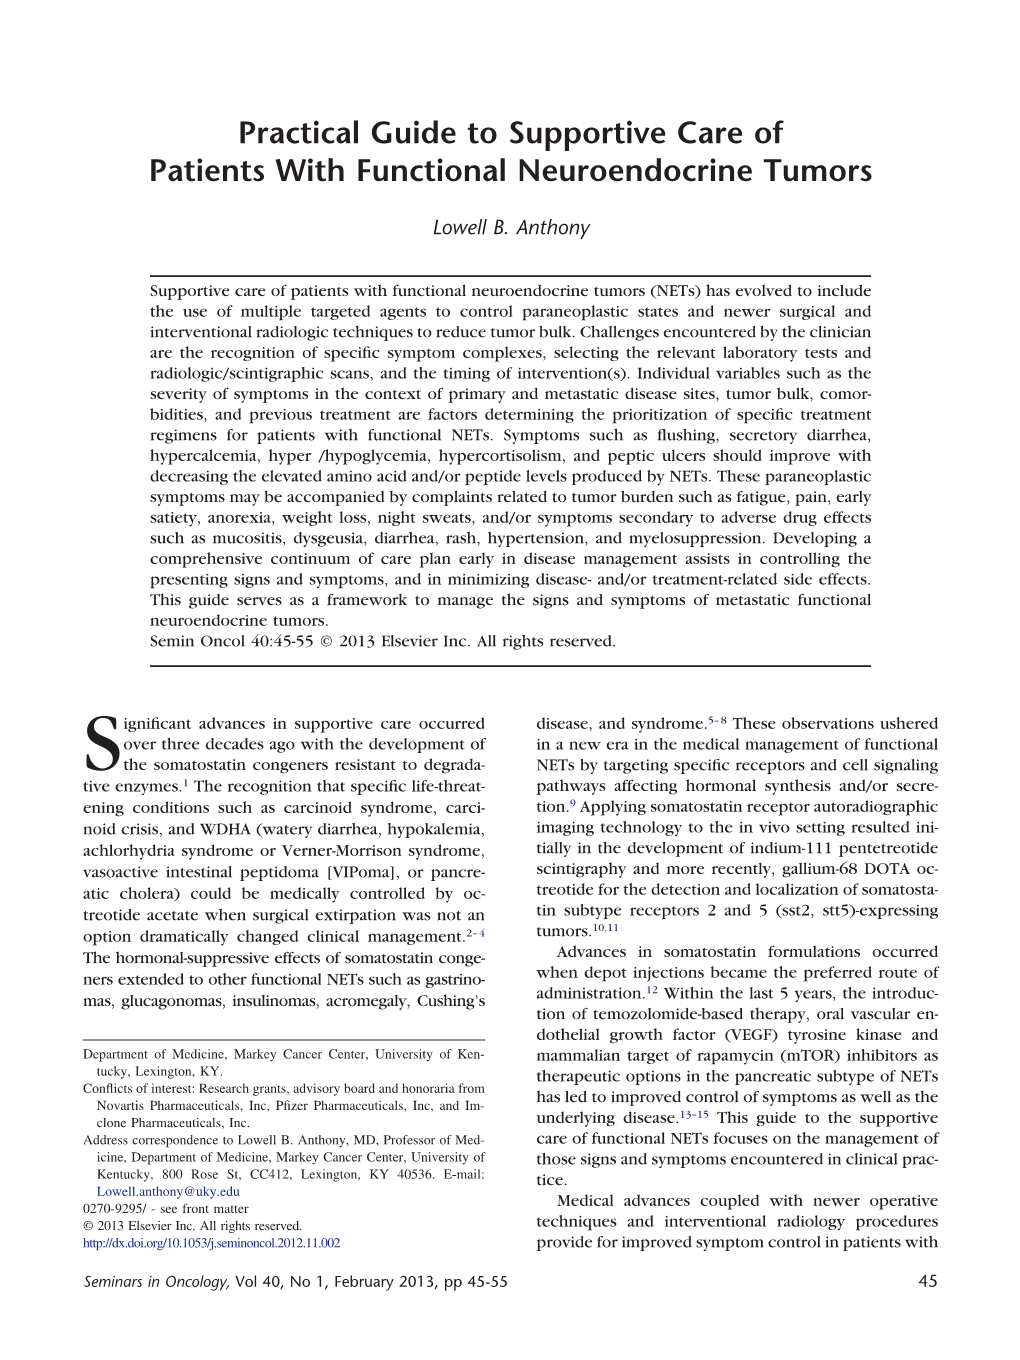 Practical Guide to Supportive Care of Patients with Functional Neuroendocrine Tumors